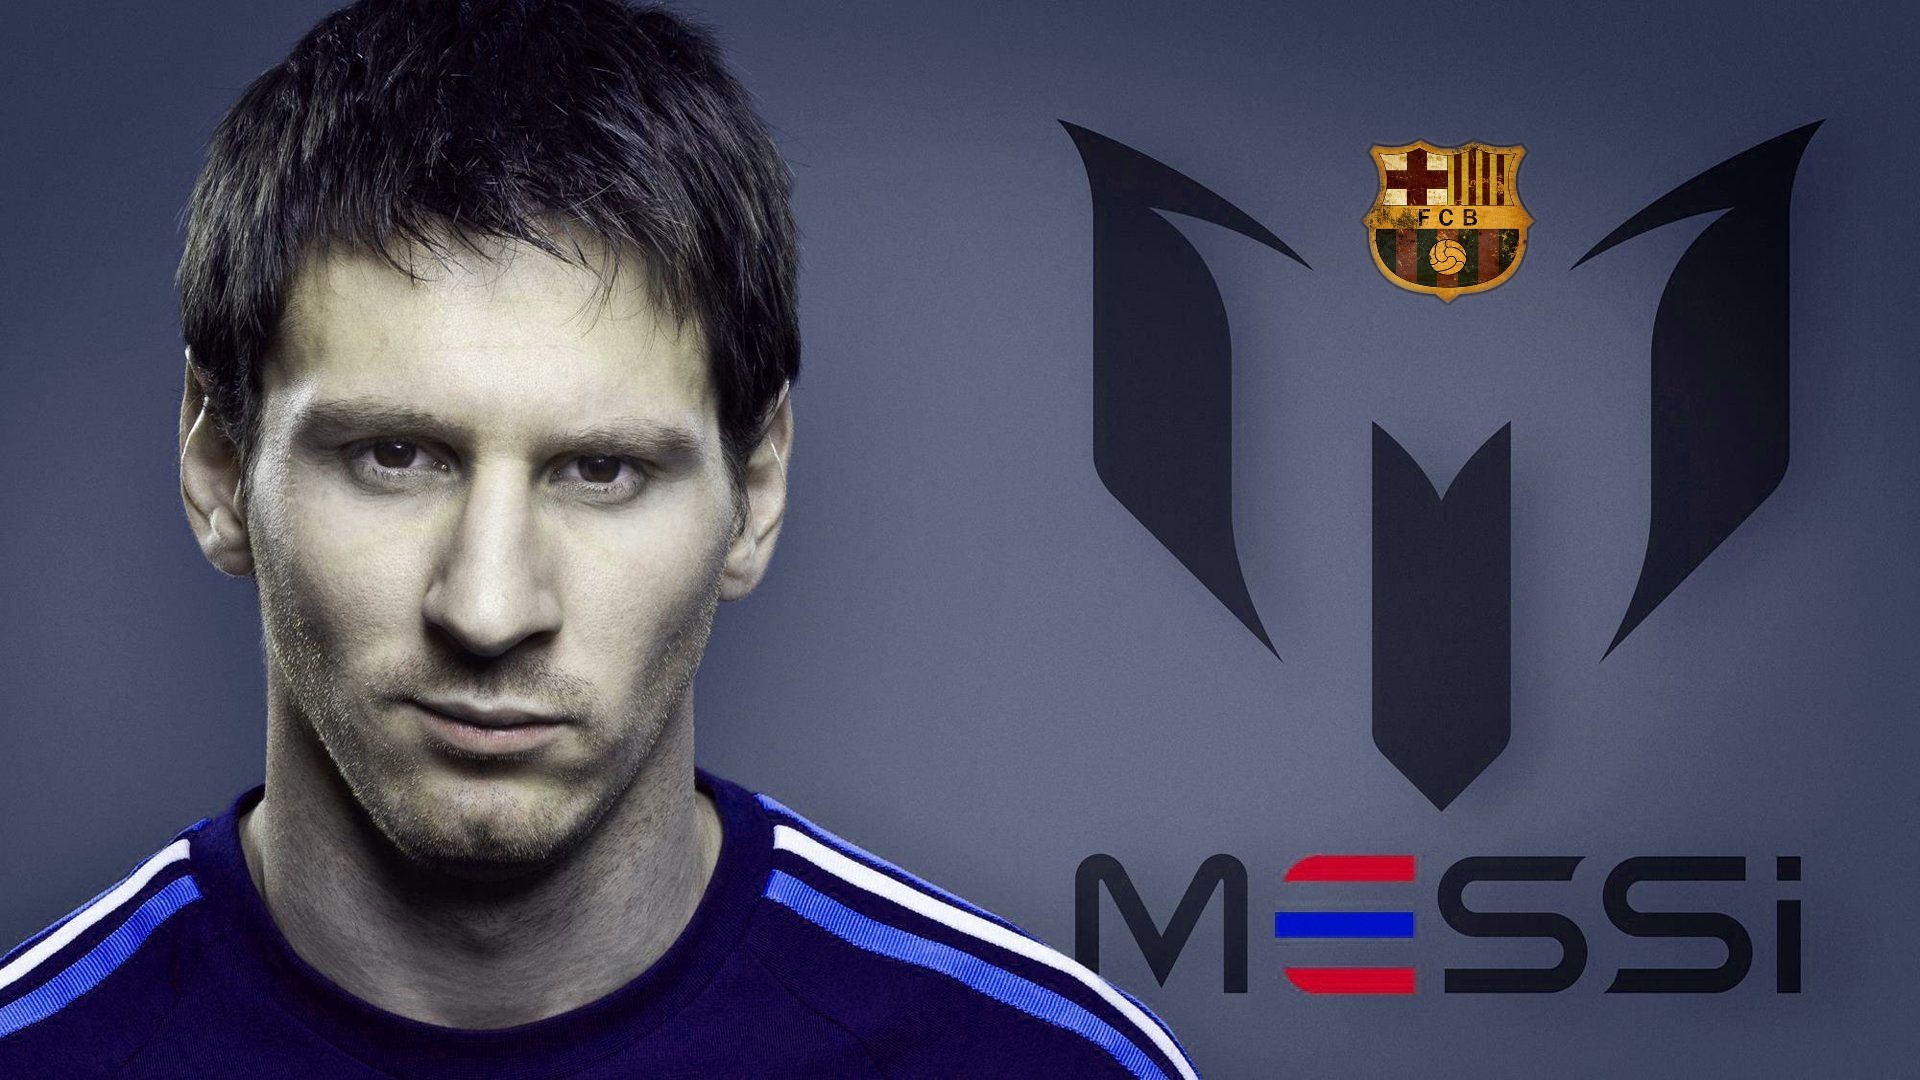 Lionel Messi Barcelona Backgrounds HD With Resolution 1920X1080 pixel. You can make this wallpaper for your Mac or Windows Desktop Background, iPhone, Android or Tablet and another Smartphone device for free